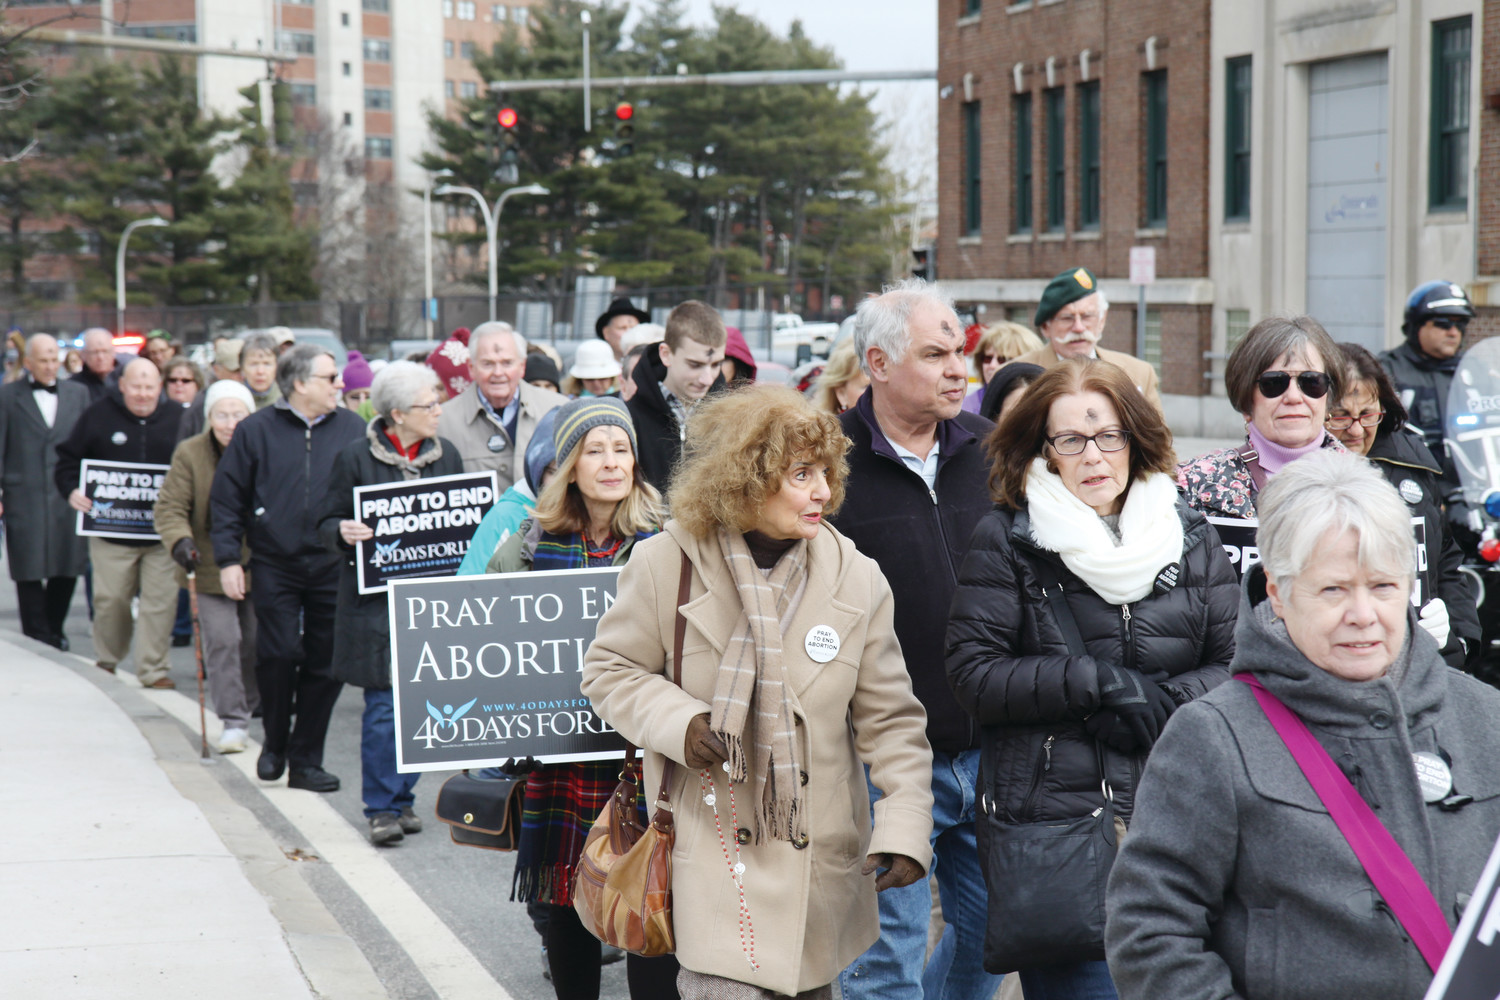 A large group of pro-life advocates, led by Bishop Thomas J. Tobin and accompanied by a police escort, marched to the Providence Planned Parenthood clinic following Ash Wednesday Mass on February 14. The procession marked the start of the 40 Days for Life Lenten prayer campaign.